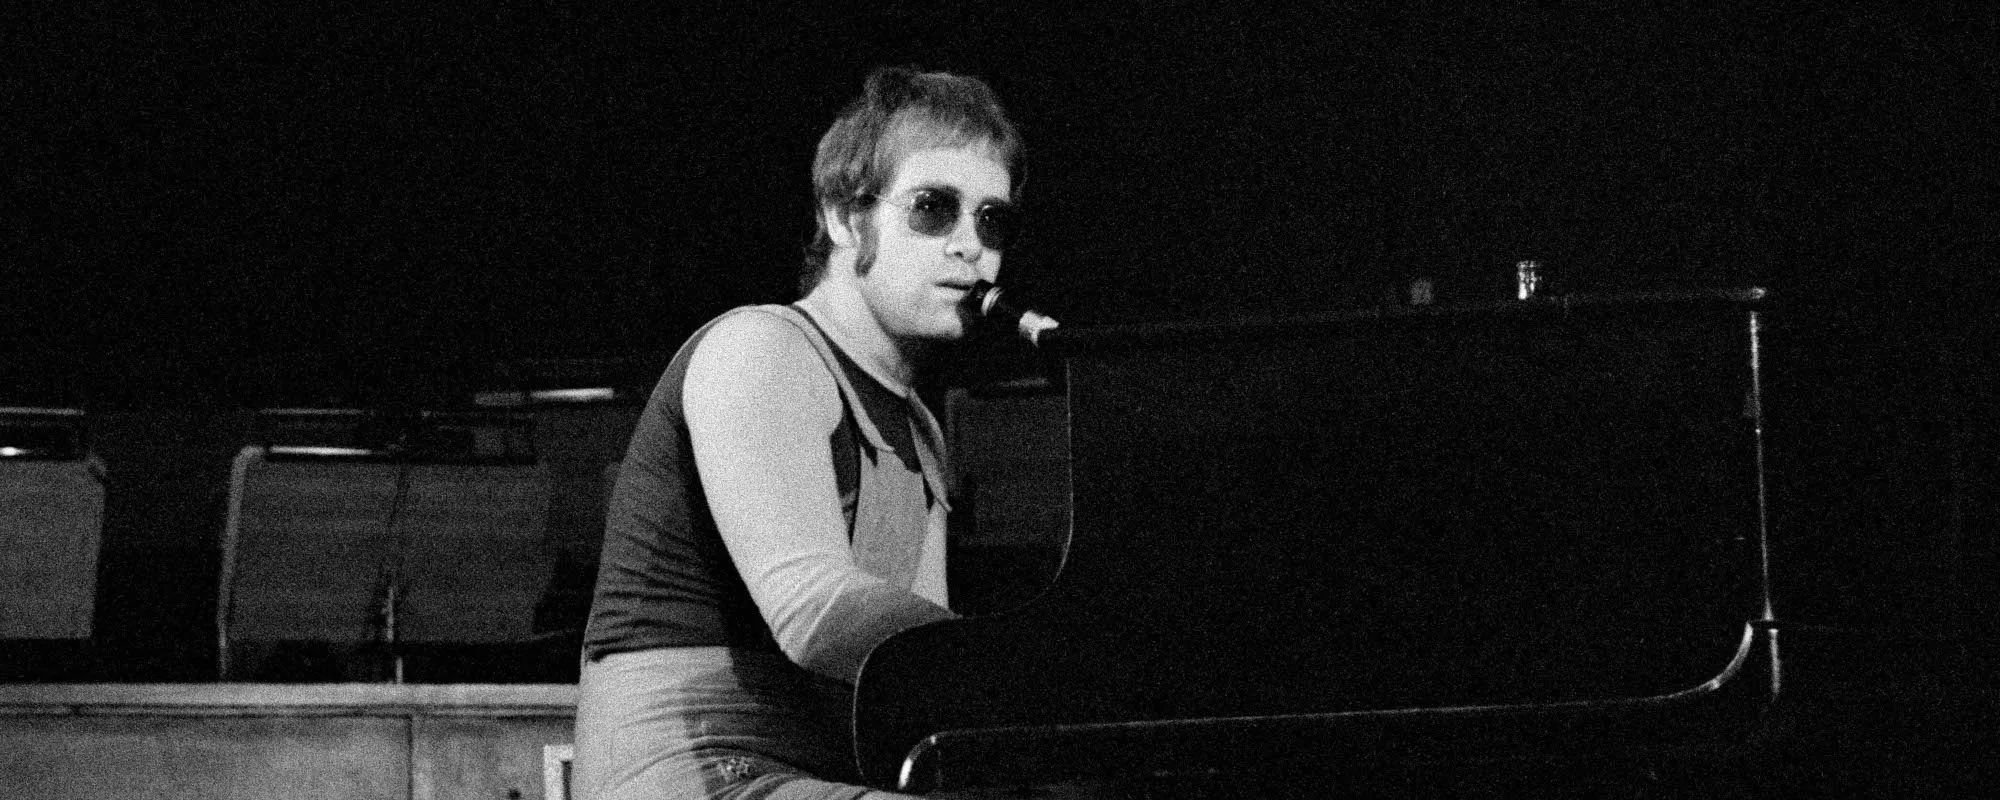 Review: The 50th Anniversary Edition of Elton John’s ‘Honky Chateau’ Displays His Enthusiasm and Creativity